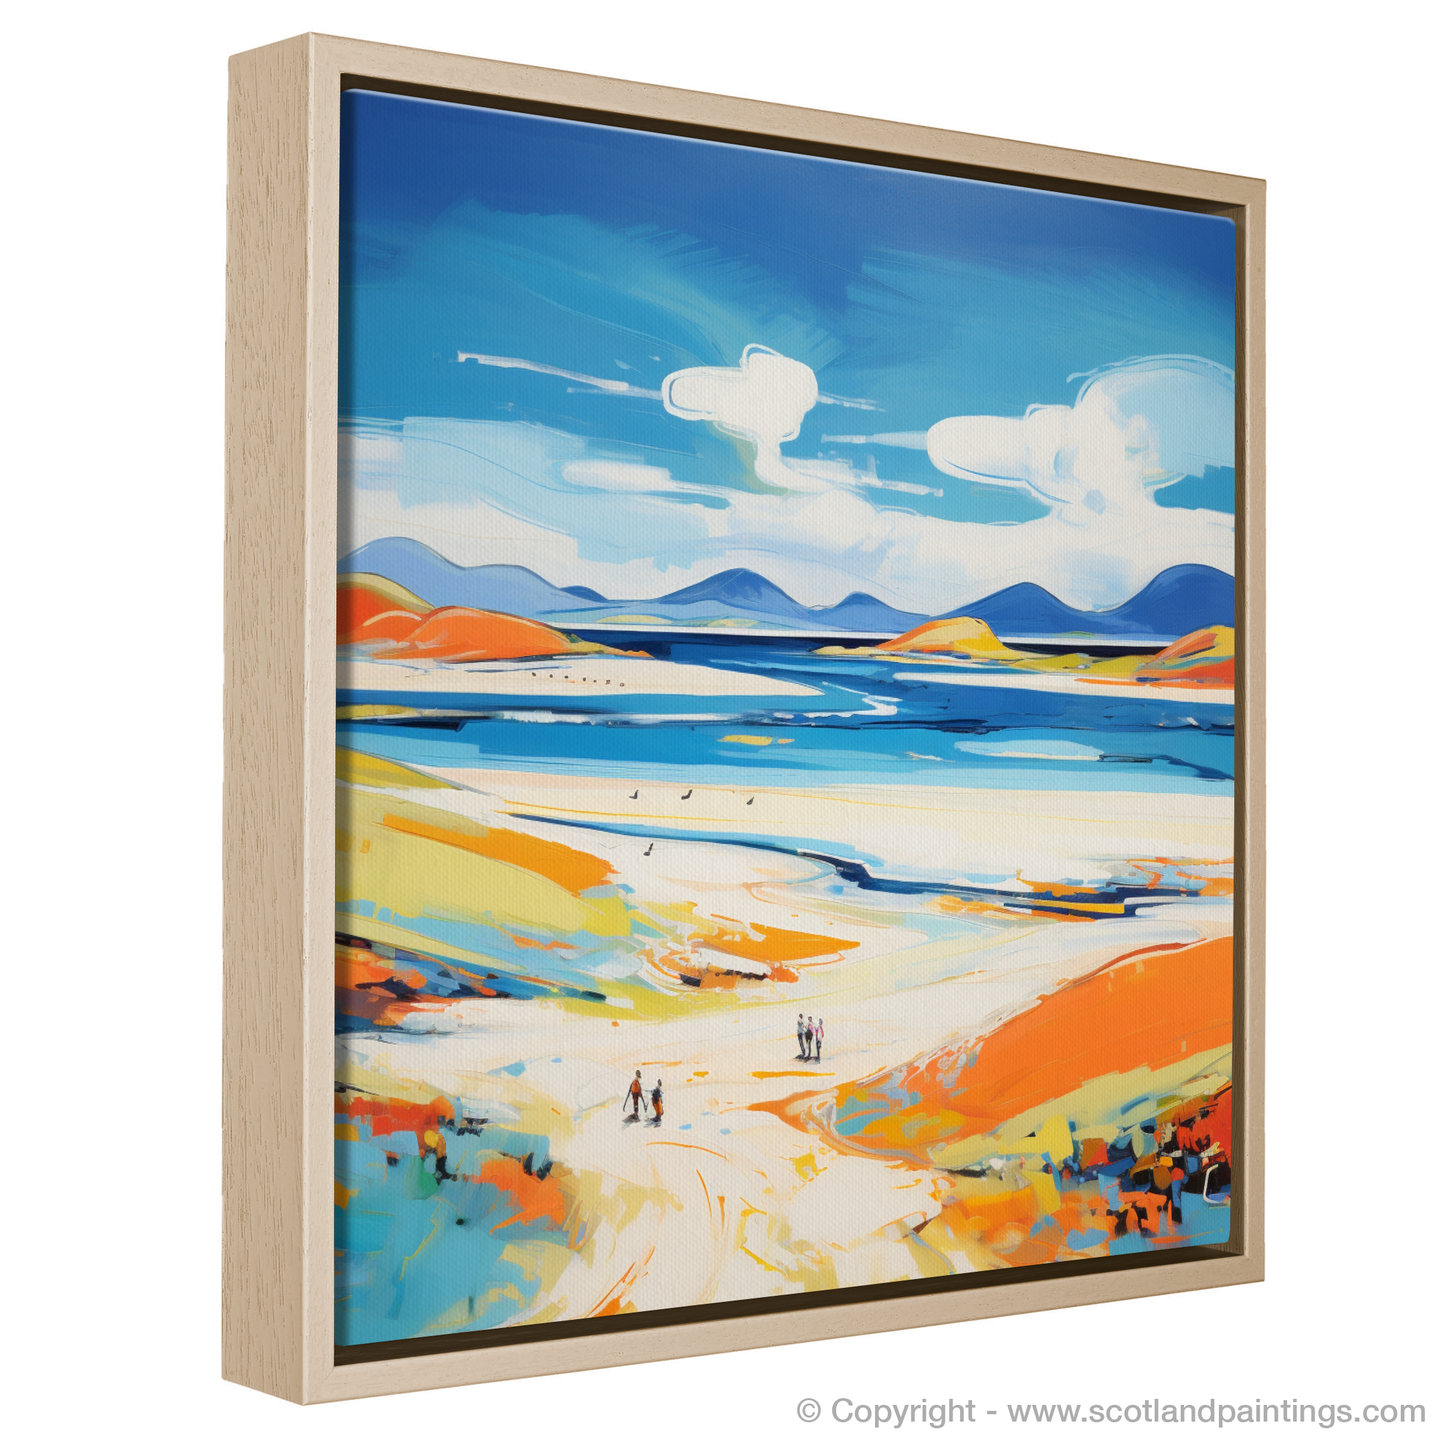 Painting and Art Print of Luskentyre Beach, Isle of Harris entitled "Luskentyre Beach: A Fauvist Ode to Scottish Shores".